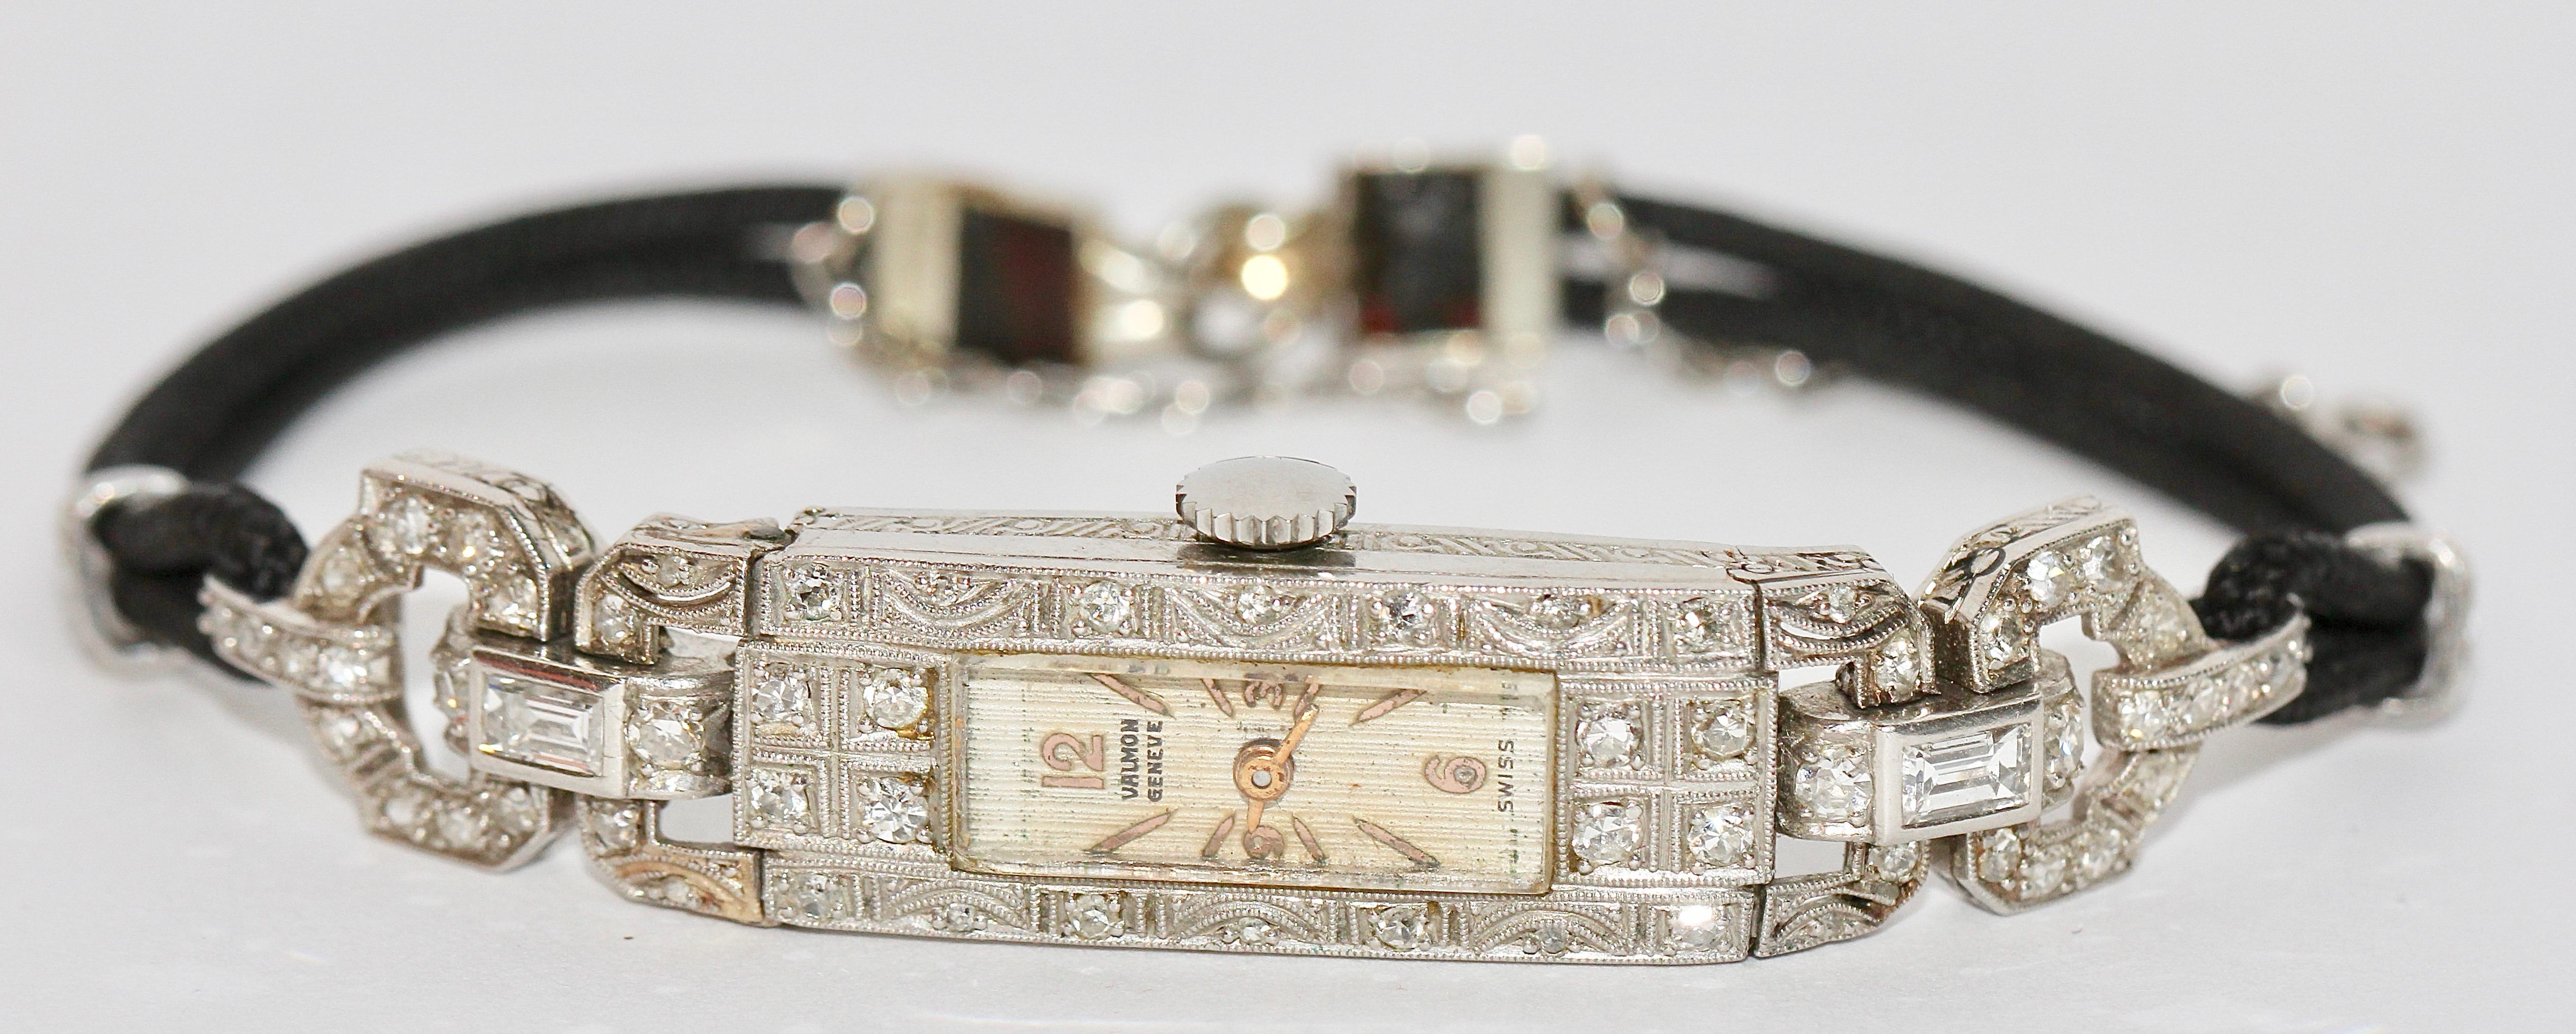 Enchanting Art Deco platinum ladies wristwatch with diamonds.

Manual winding.

Very good original condition.

The movement can be wound up and works.

Measurements without bracelets: 60mm x 10.5mm.